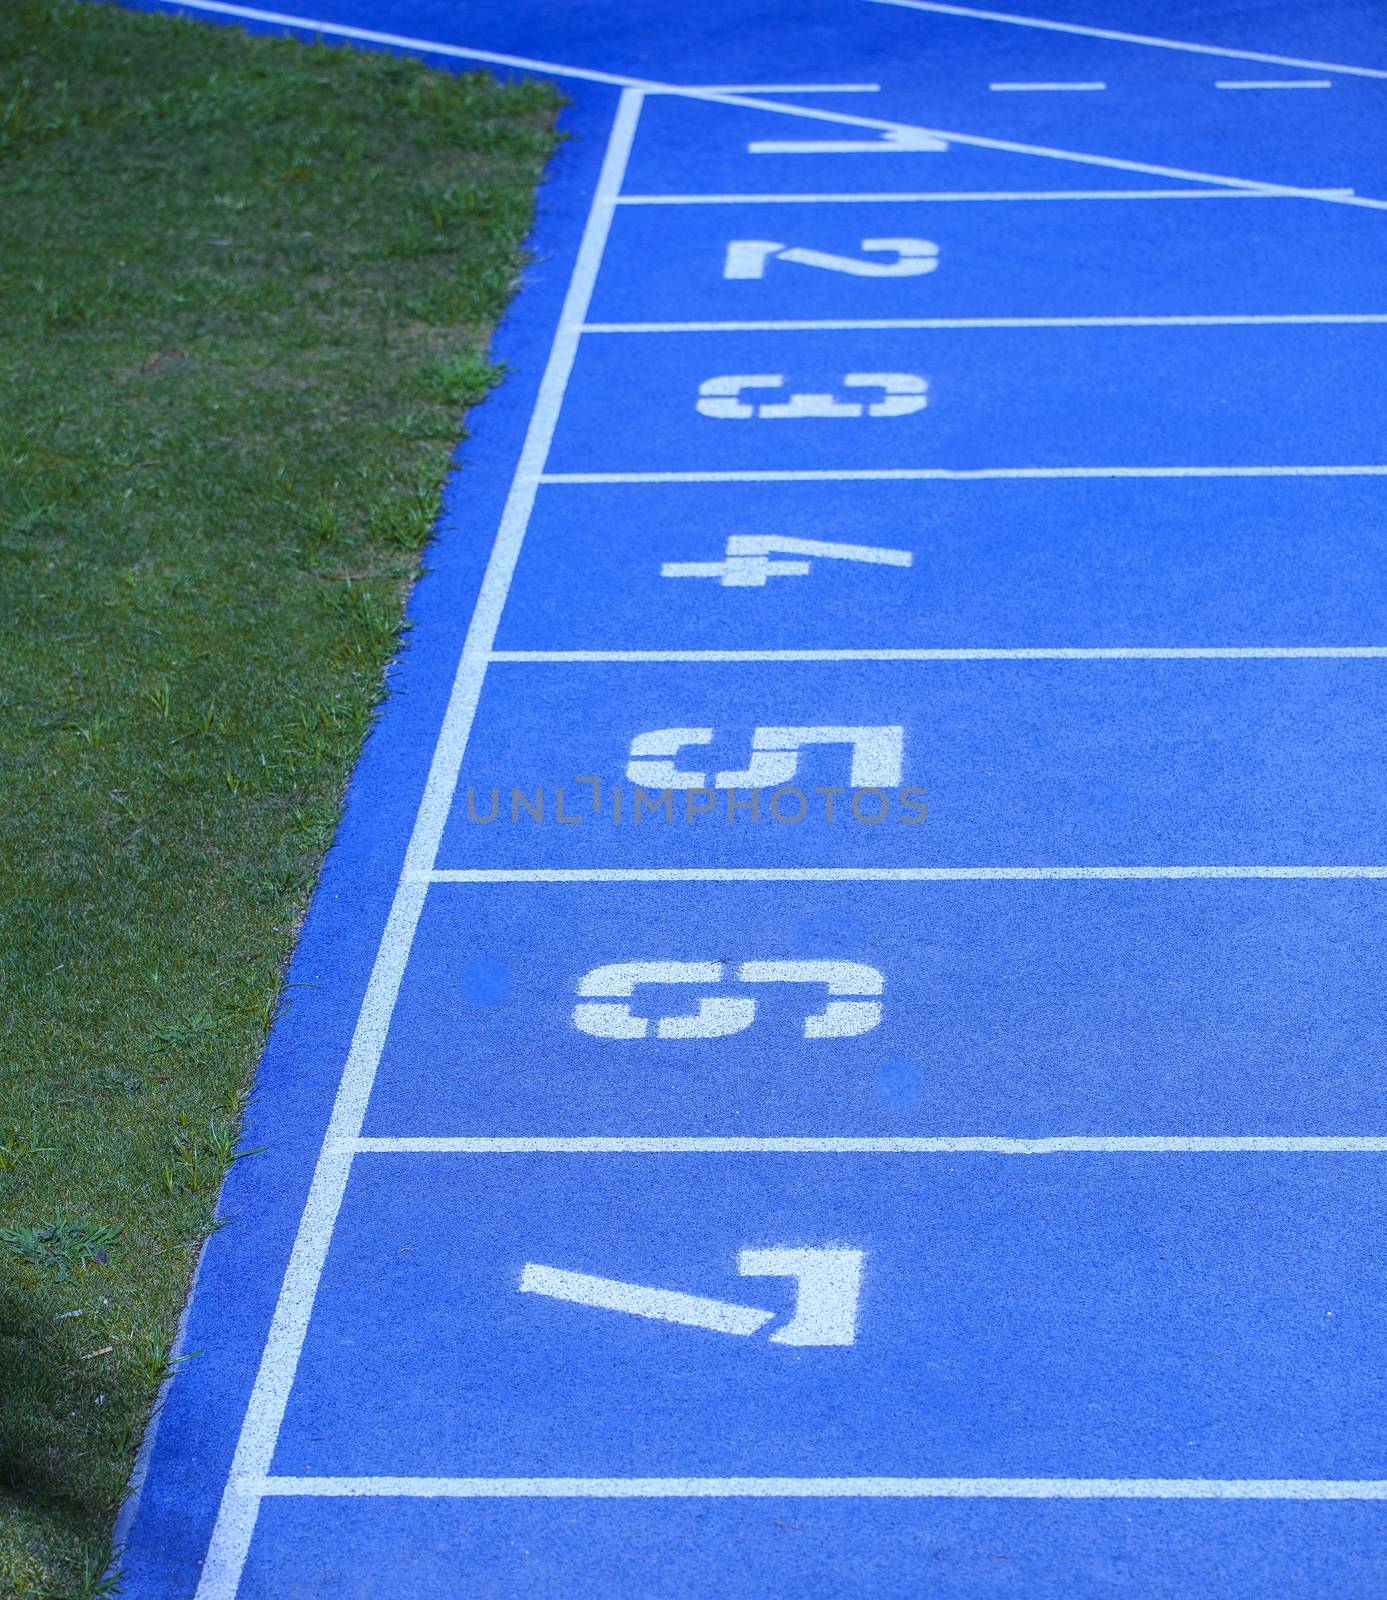 Blue athletic track in a stadium